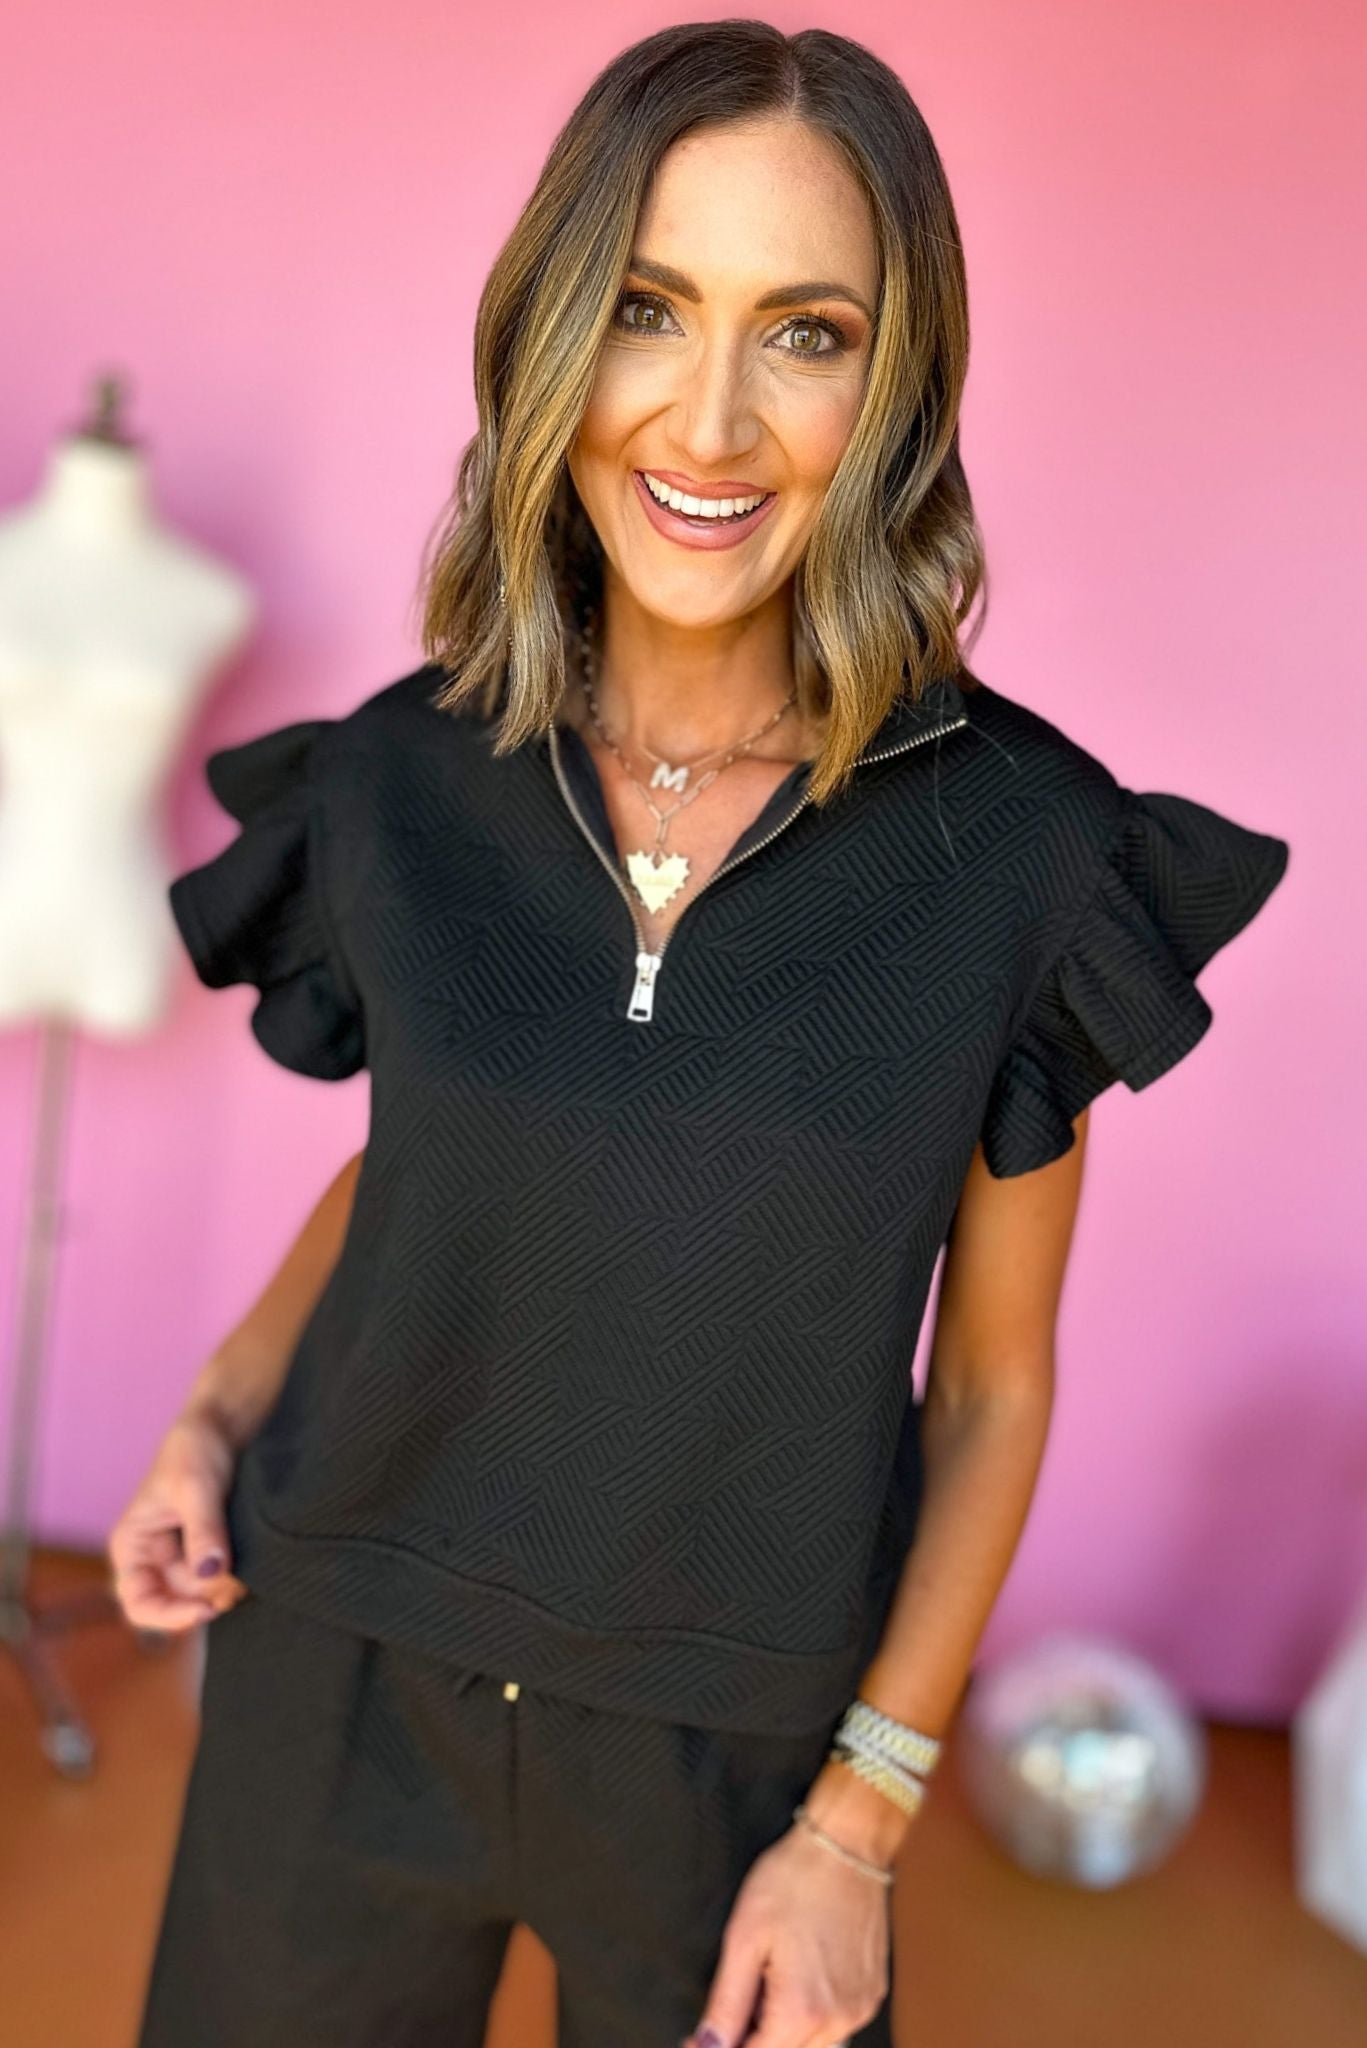 SSYS The Claire Set In Black,  ssys set, ssys the label, must have set, matching set, must have style, must have fall, fall fashion, fall matching set, elevated style, mom style, shop style your senses by mallory fitzsimmons